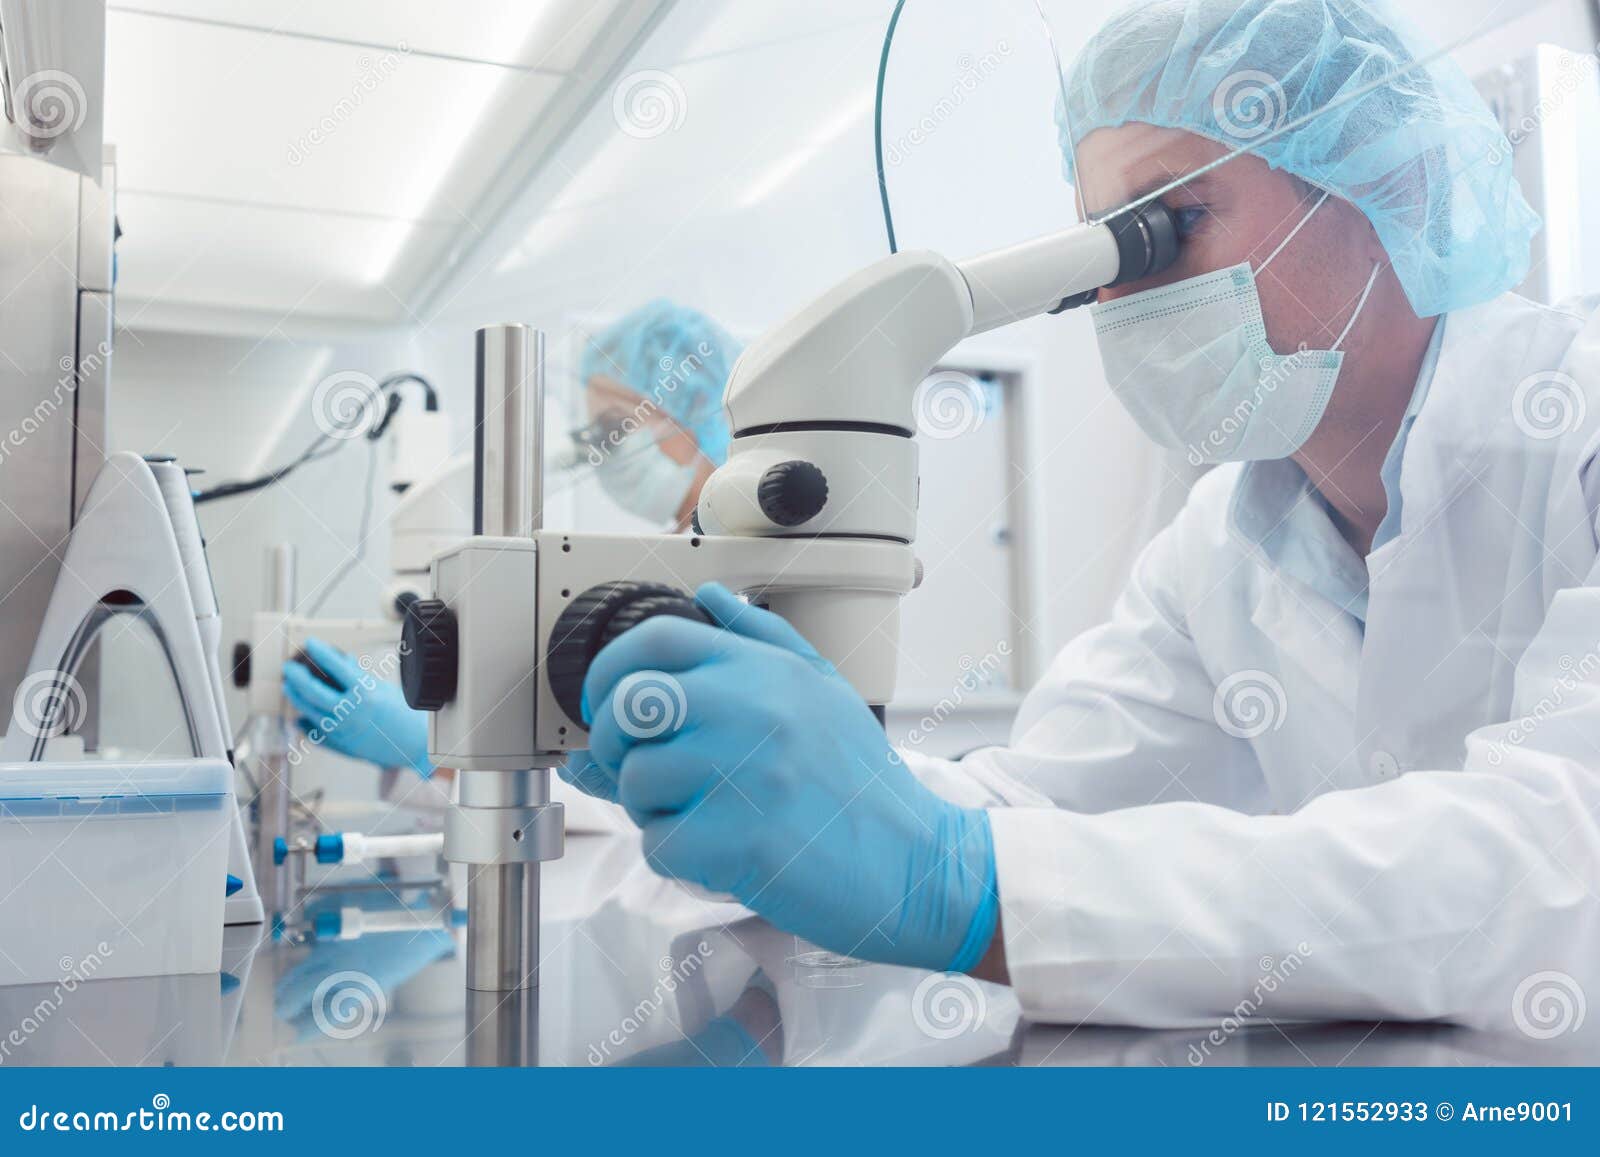 Two Lab Technicians or Scientists Working in Laboratory Stock Image